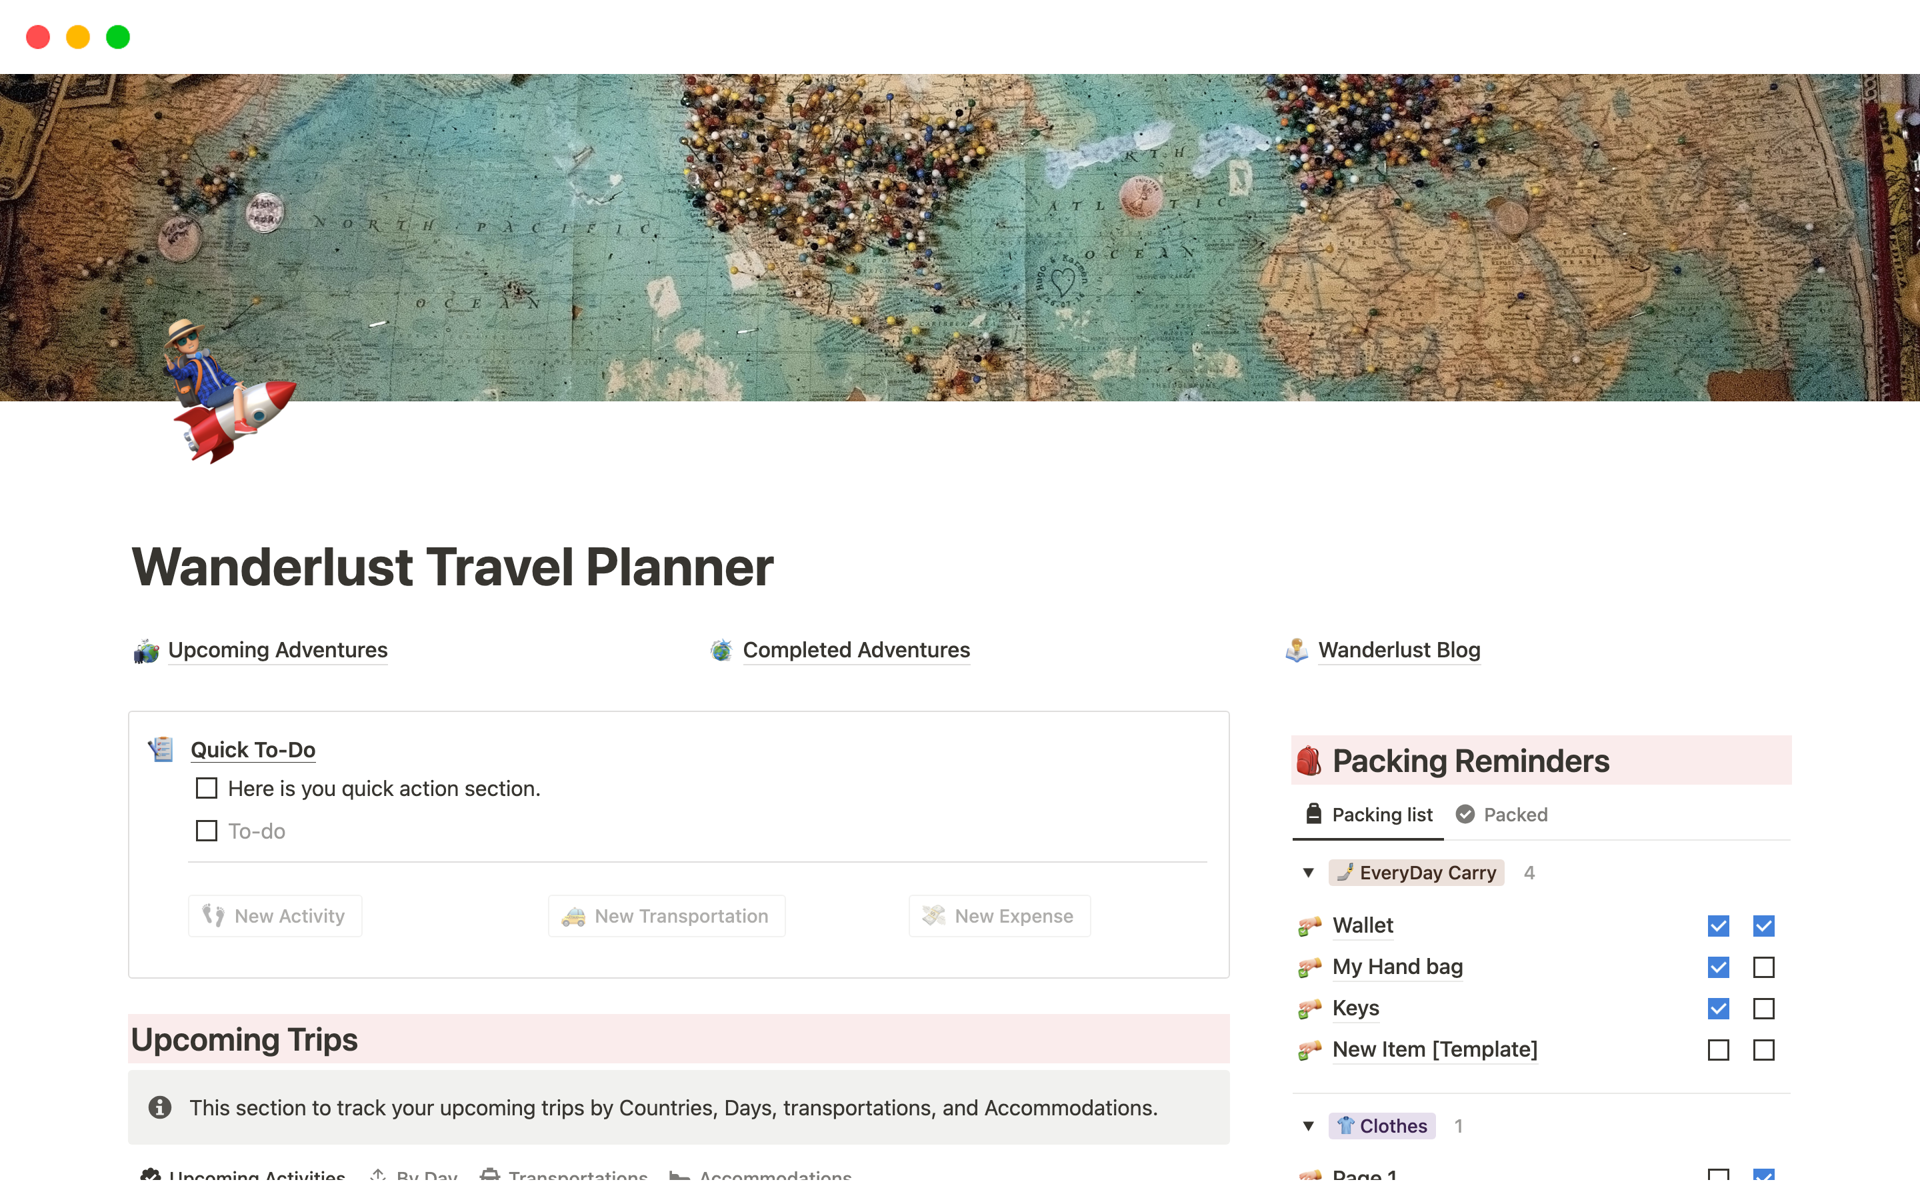 This Notion template helps travelers stay organized and reduce stress when planning trips. It includes features like activity tracking, packing reminders, expense tracking, itinerary planning, and a travel blog. It's customizable and comes with a guide to help users get started.